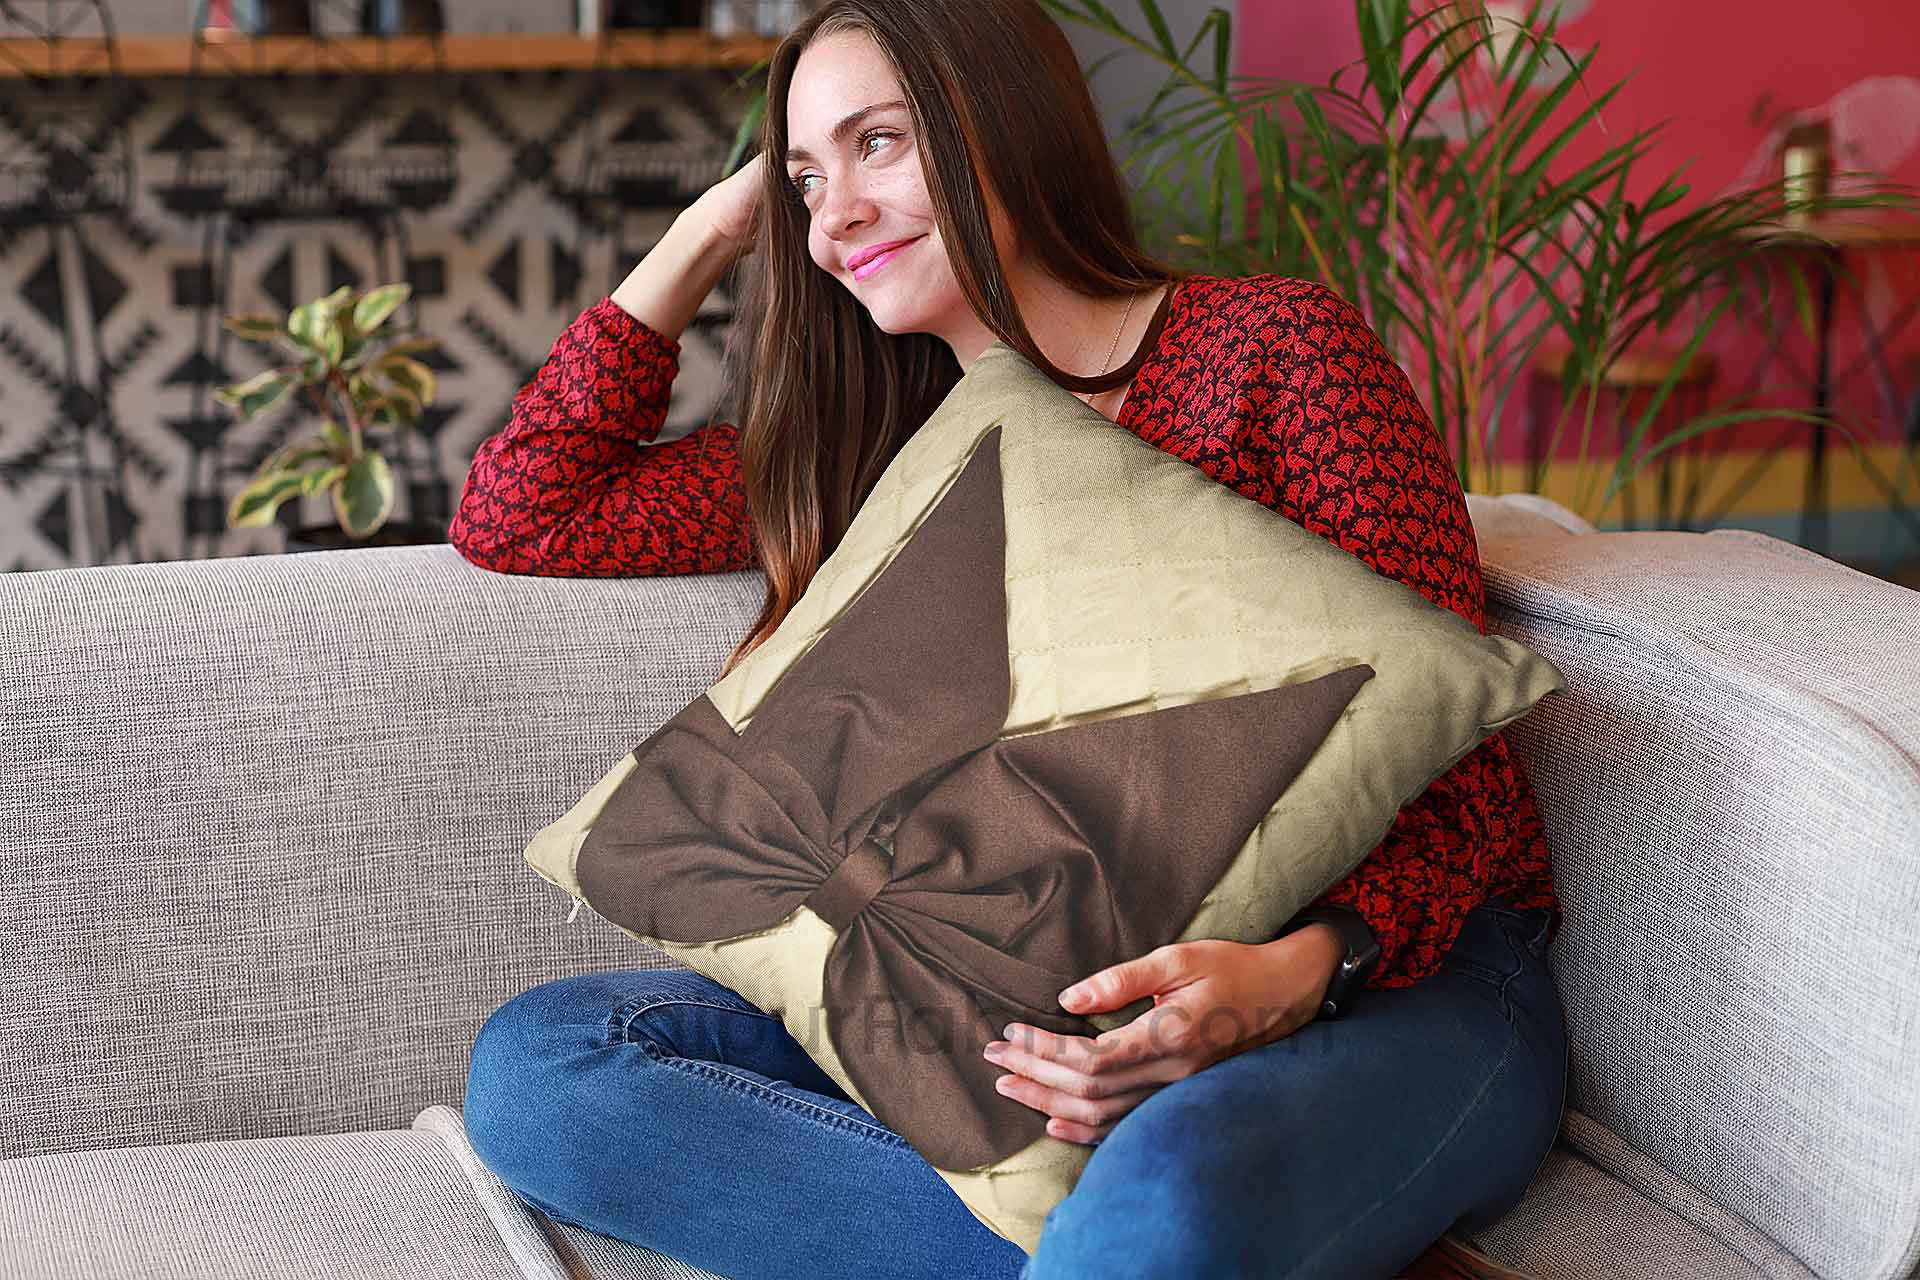 Beige Brown Bow Tie Square Cotton Cushion Cover